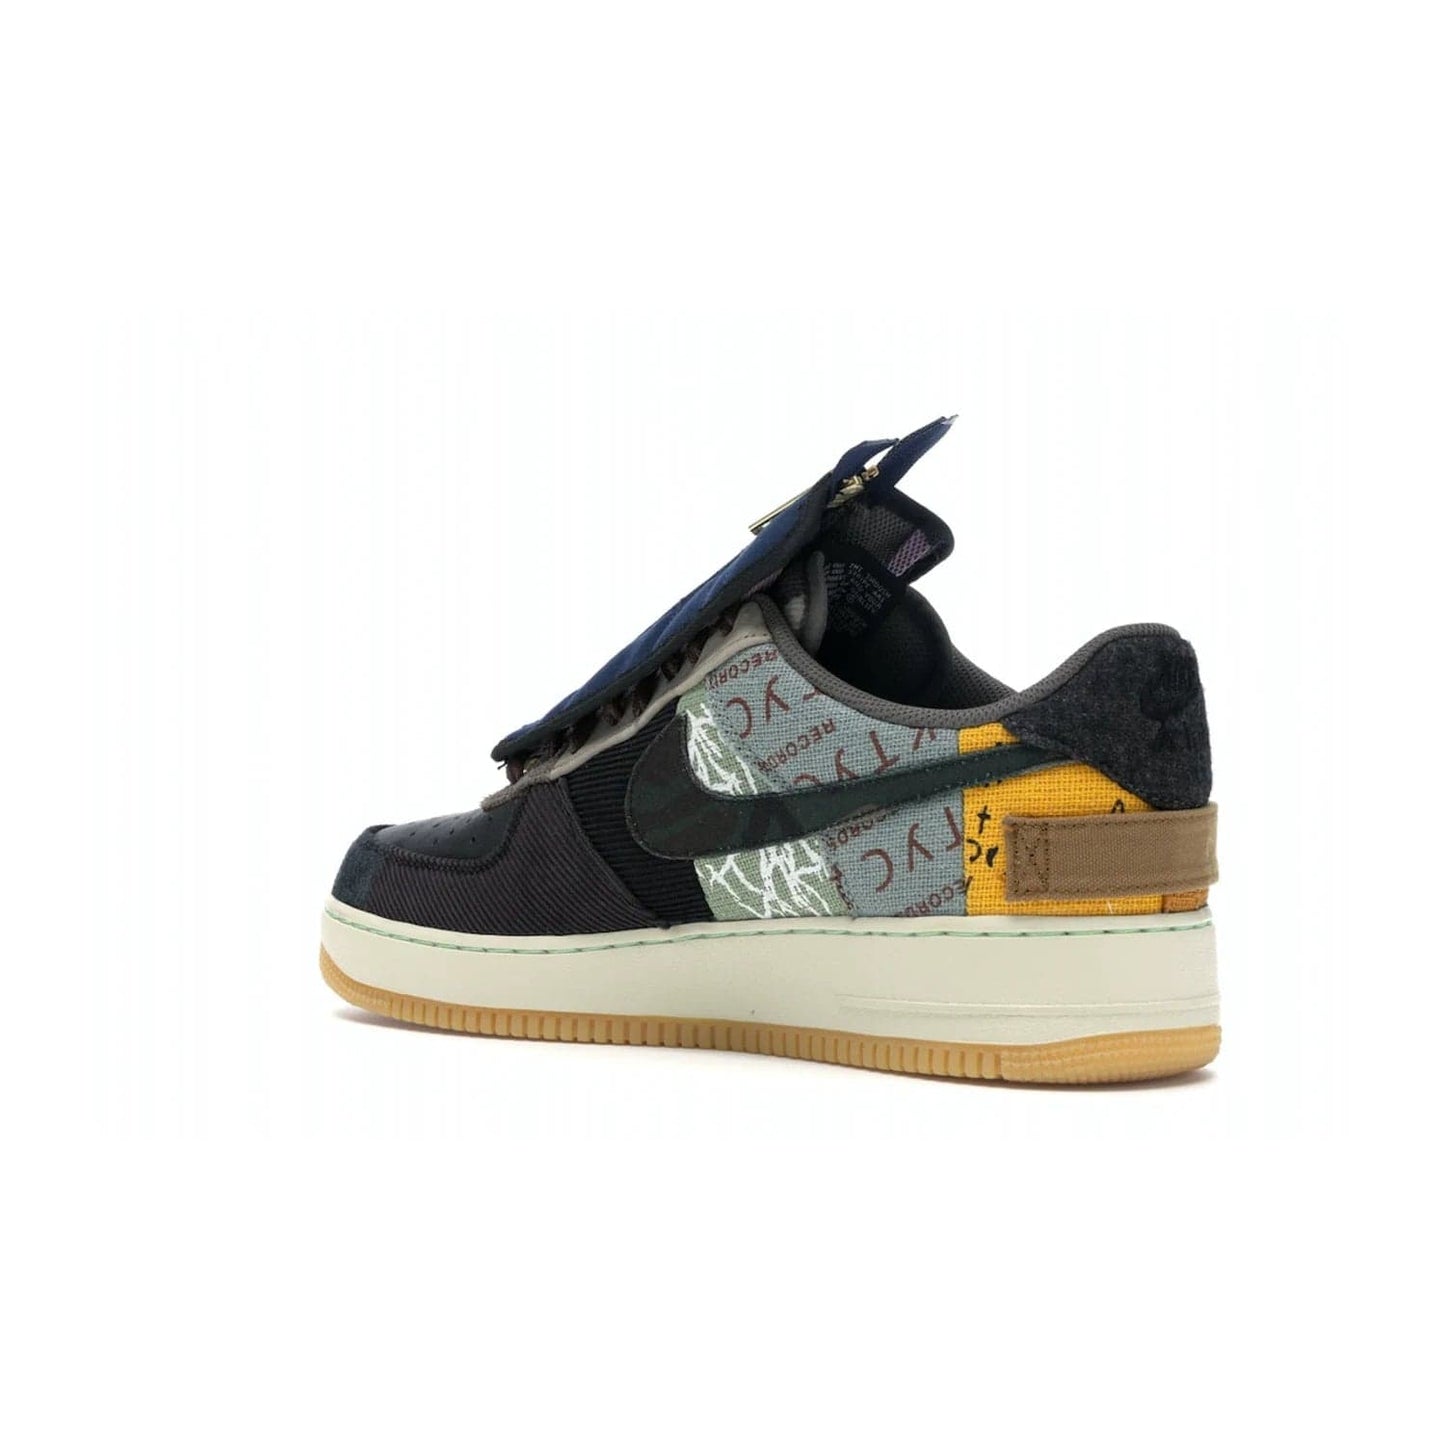 Nike Air Force 1 Low Travis Scott Cactus Jack - Image 23 - Only at www.BallersClubKickz.com - The Nike Air Force 1 Low Travis Scott Cactus Jack features a unique, multi-colored patchwork upper with muted bronze and fossil accents. Includes detachable lace cover, brass zipper, and Cactus Jack insignias. A sail midsole, gum rubber outsole complete the eye-catching design. Perfect for comfort and style with unexpected touches of detail.